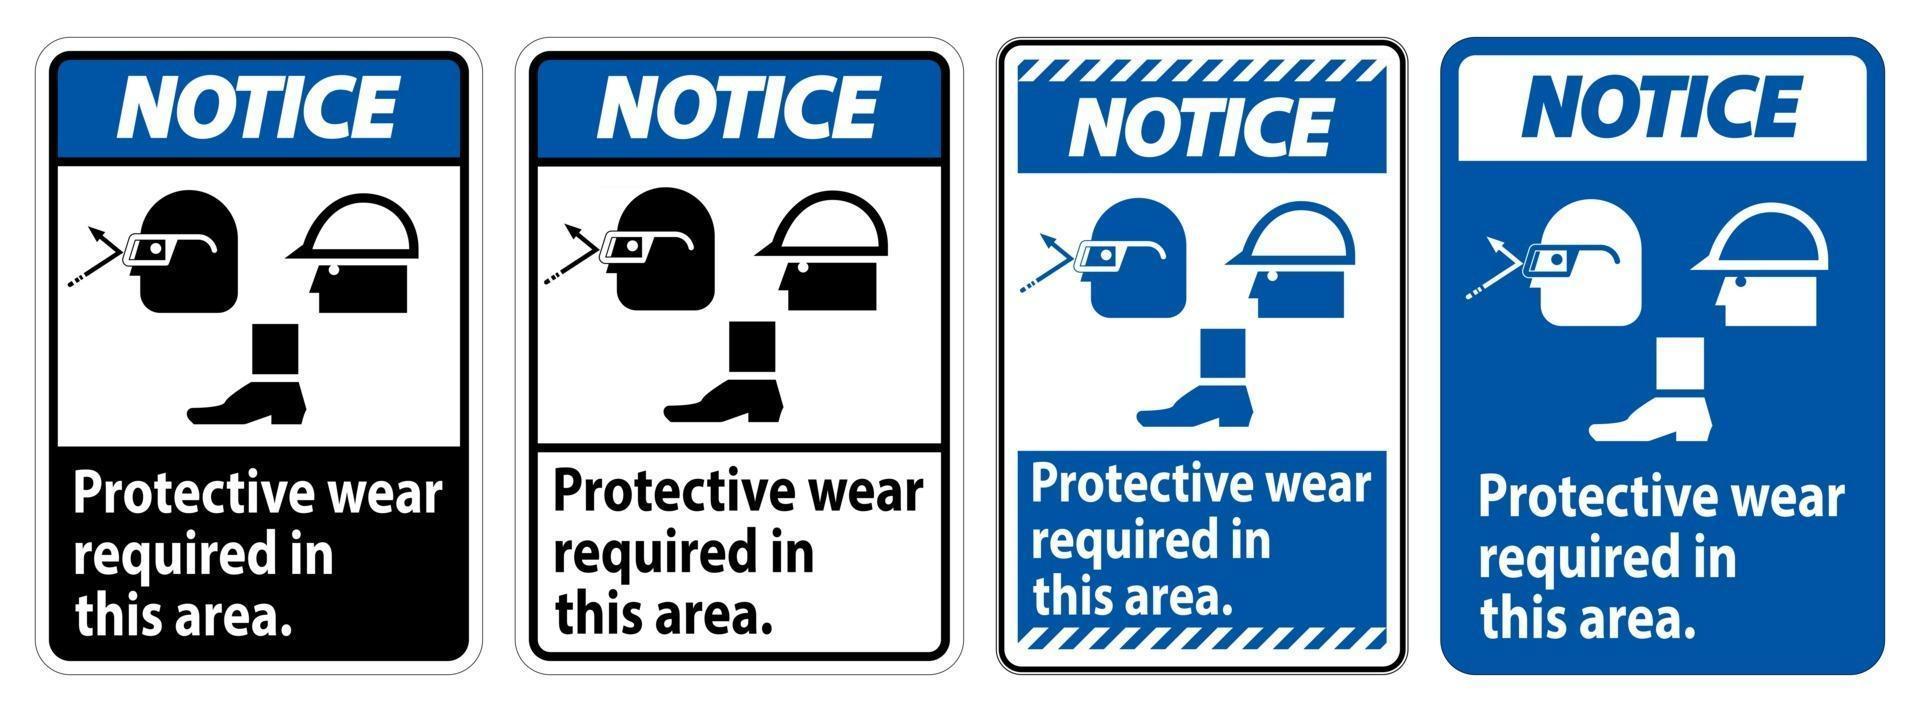 Notice Sign Protective Wear Is Required In This Area.With Goggles, Hard Hat, And Boots Symbols on white background vector